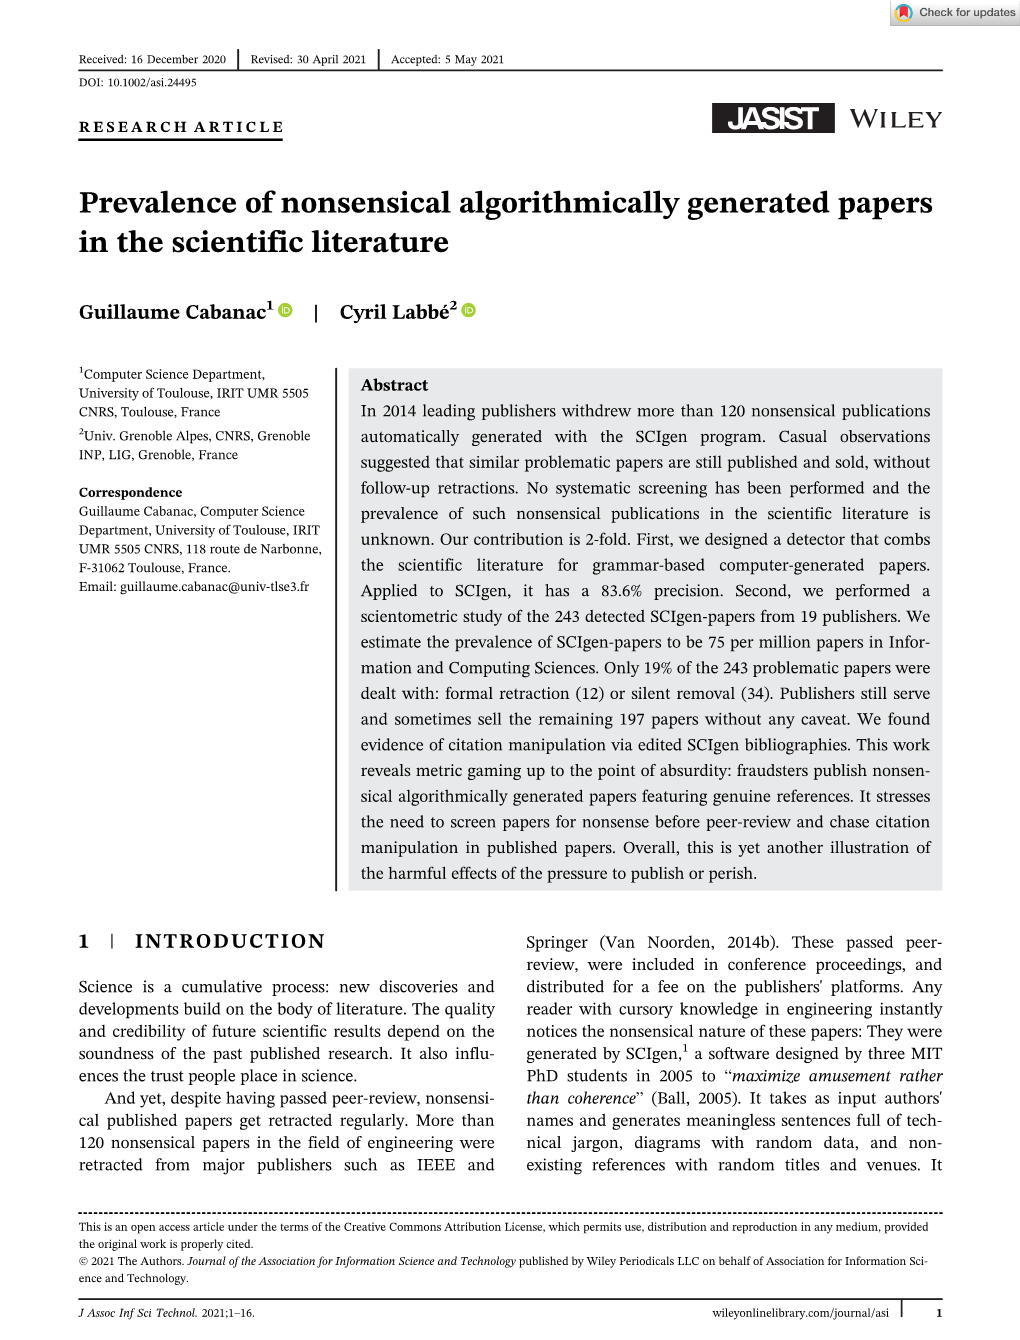 Prevalence of Nonsensical Algorithmically Generated Papers in the Scientific Literature